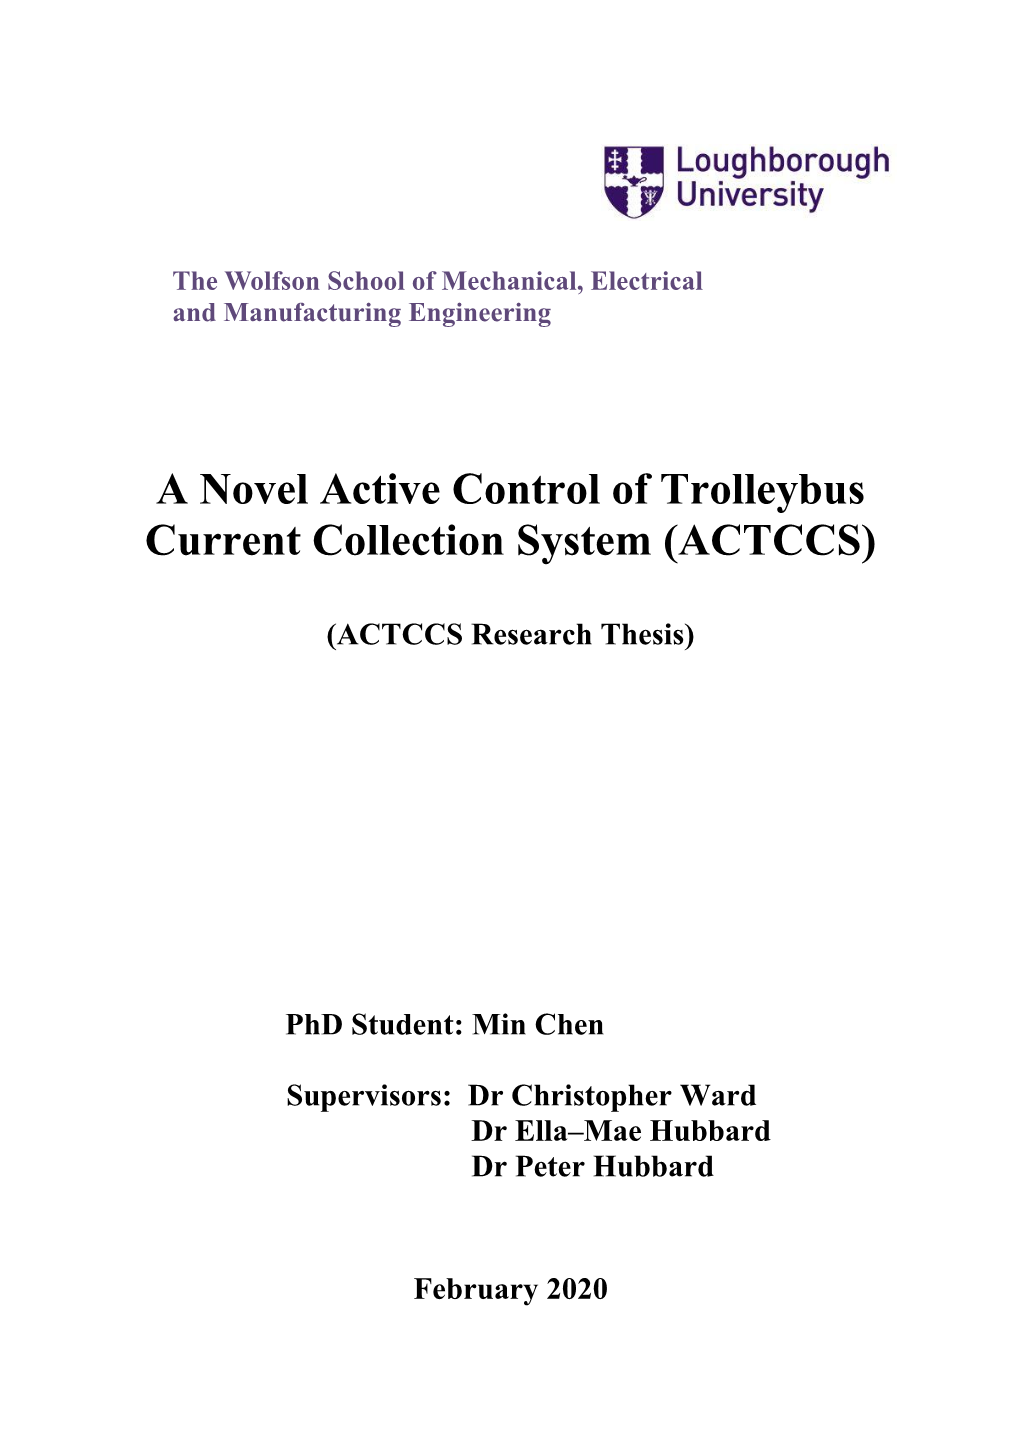 A Novel Active Control of Trolleybus Current Collection System (ACTCCS)